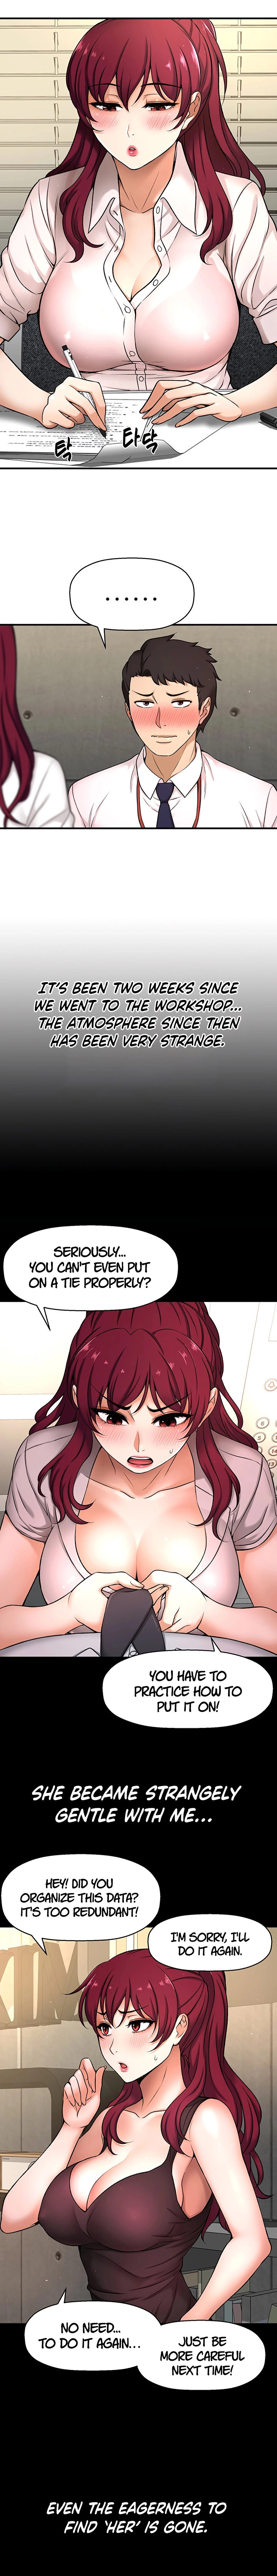 I Want to Know Her - Chapter 3 Page 8